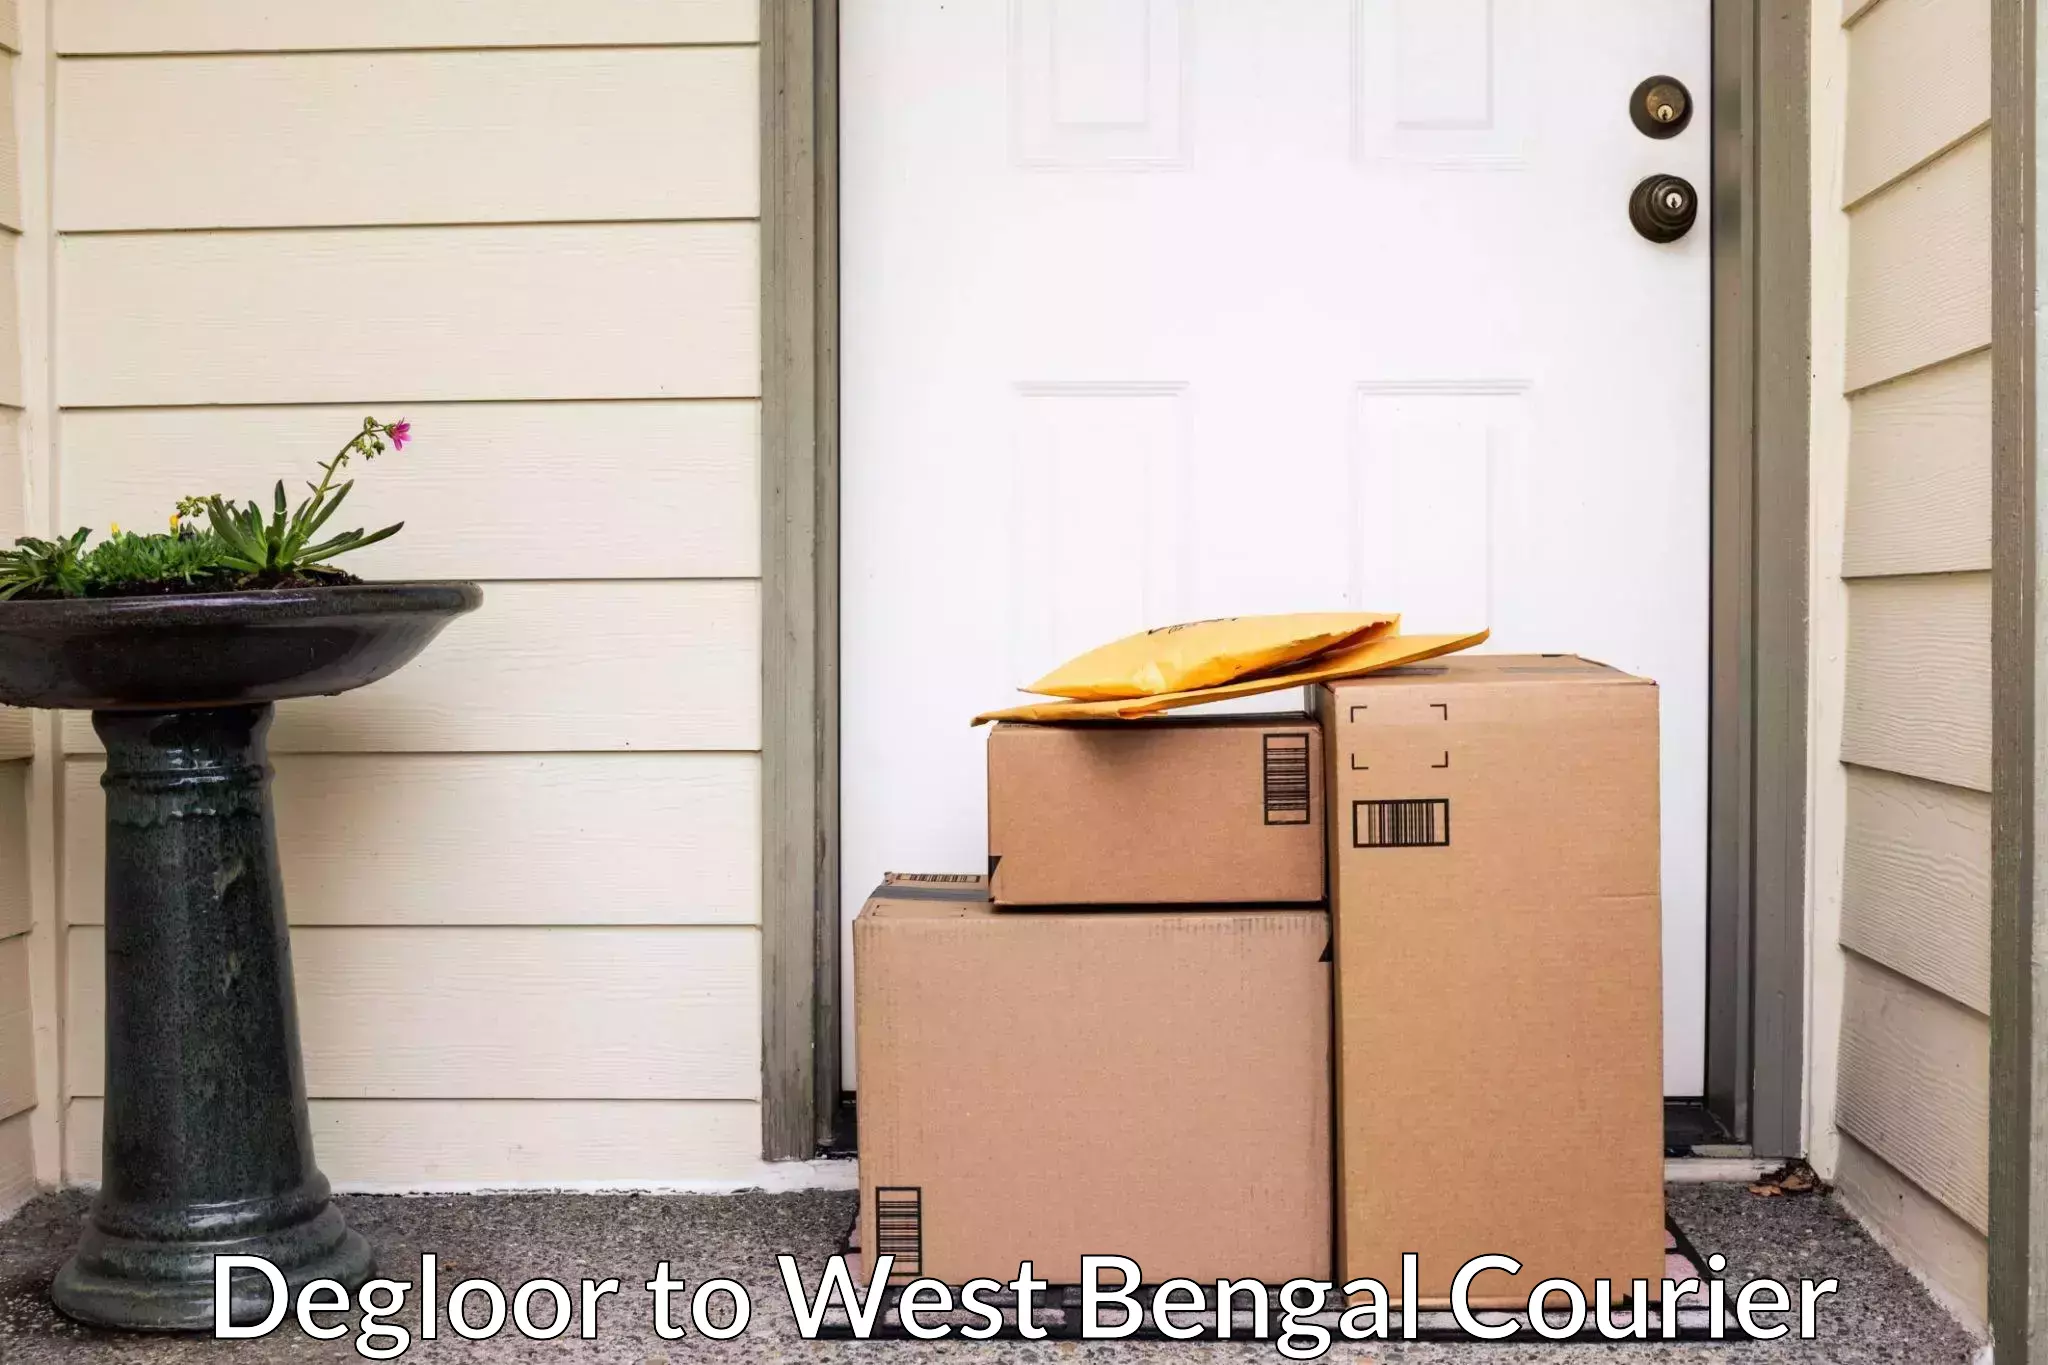 Furniture moving experts Degloor to West Bengal